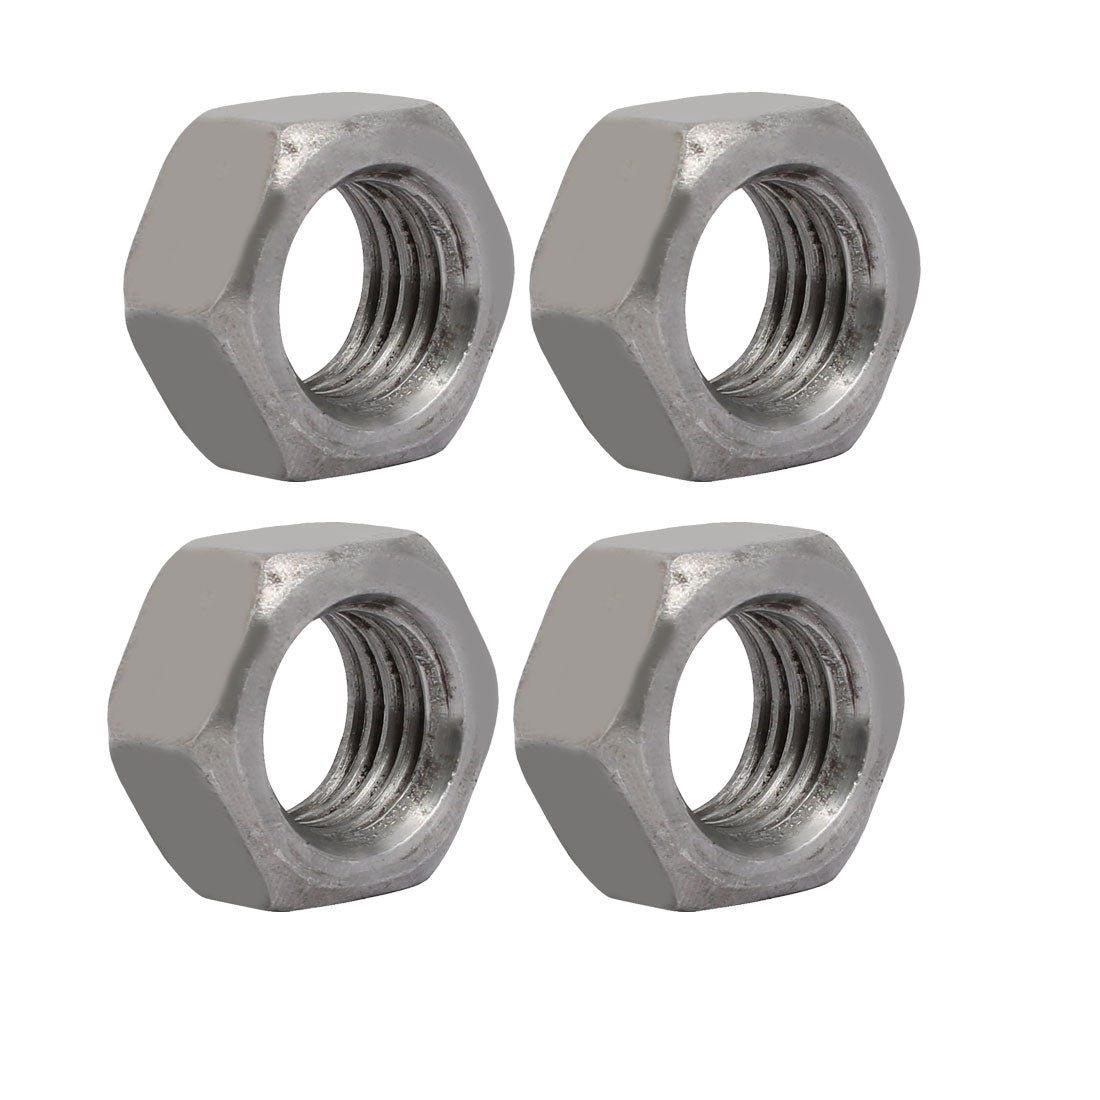 uxcell Uxcell 4pcs M20 Thread 2.5mm Pitch Metric Carbon Steel Left Hand Hex Nut